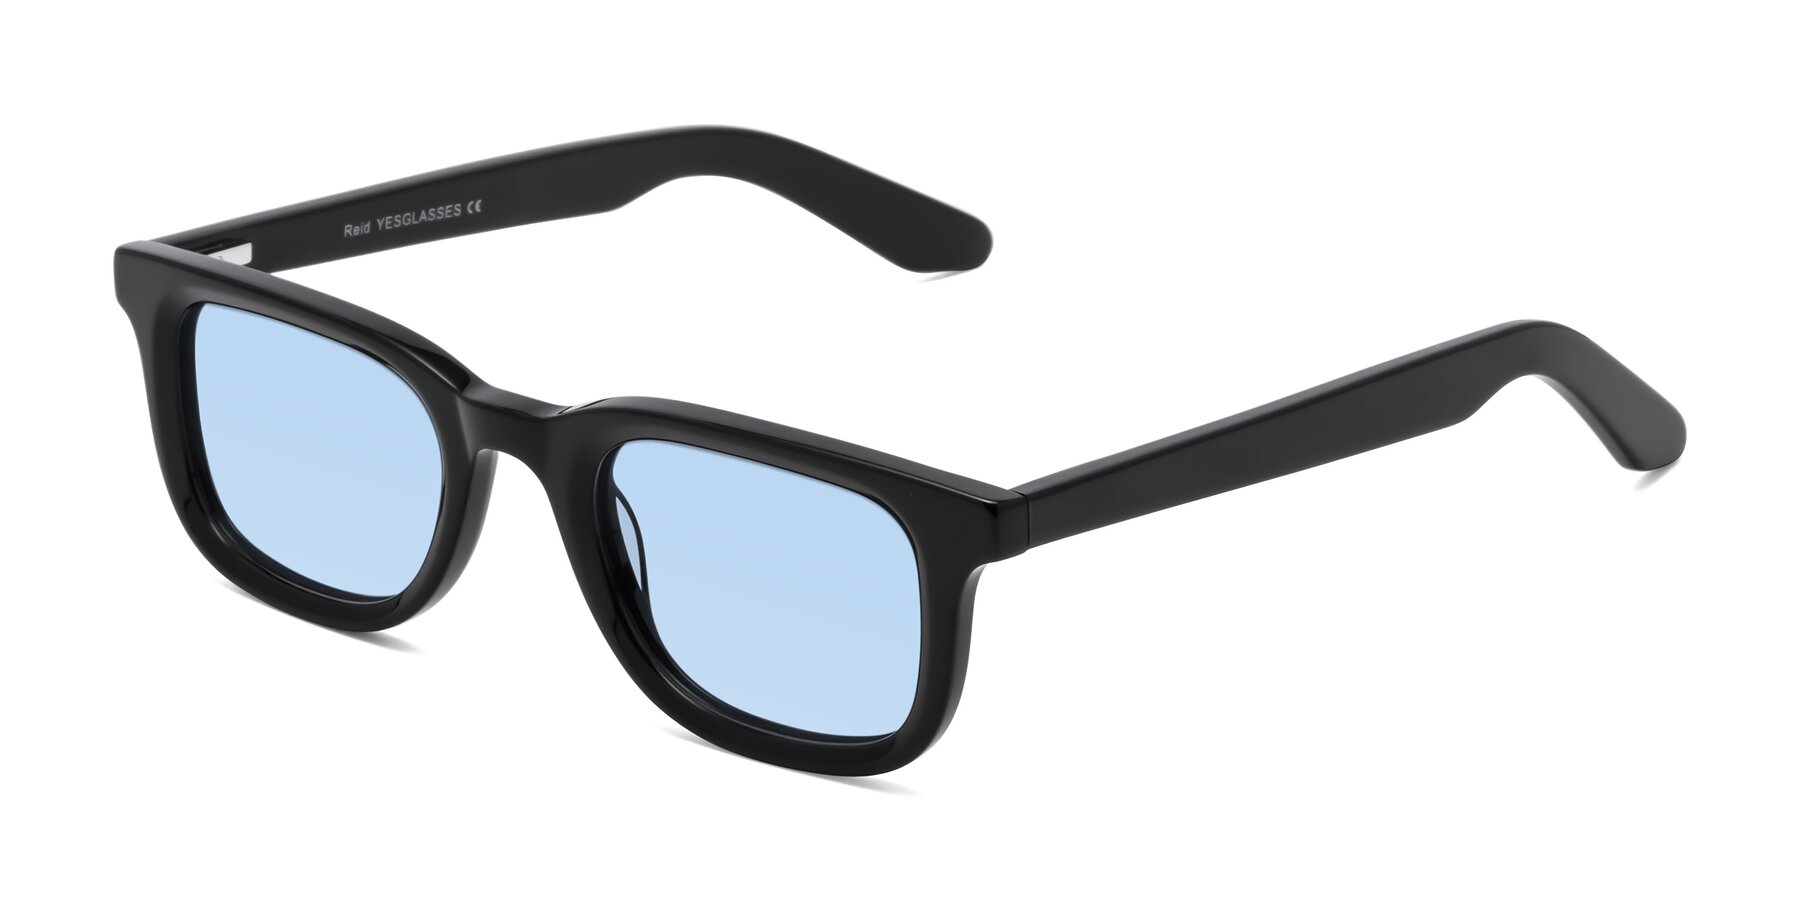 Angle of Reid in Black with Light Blue Tinted Lenses